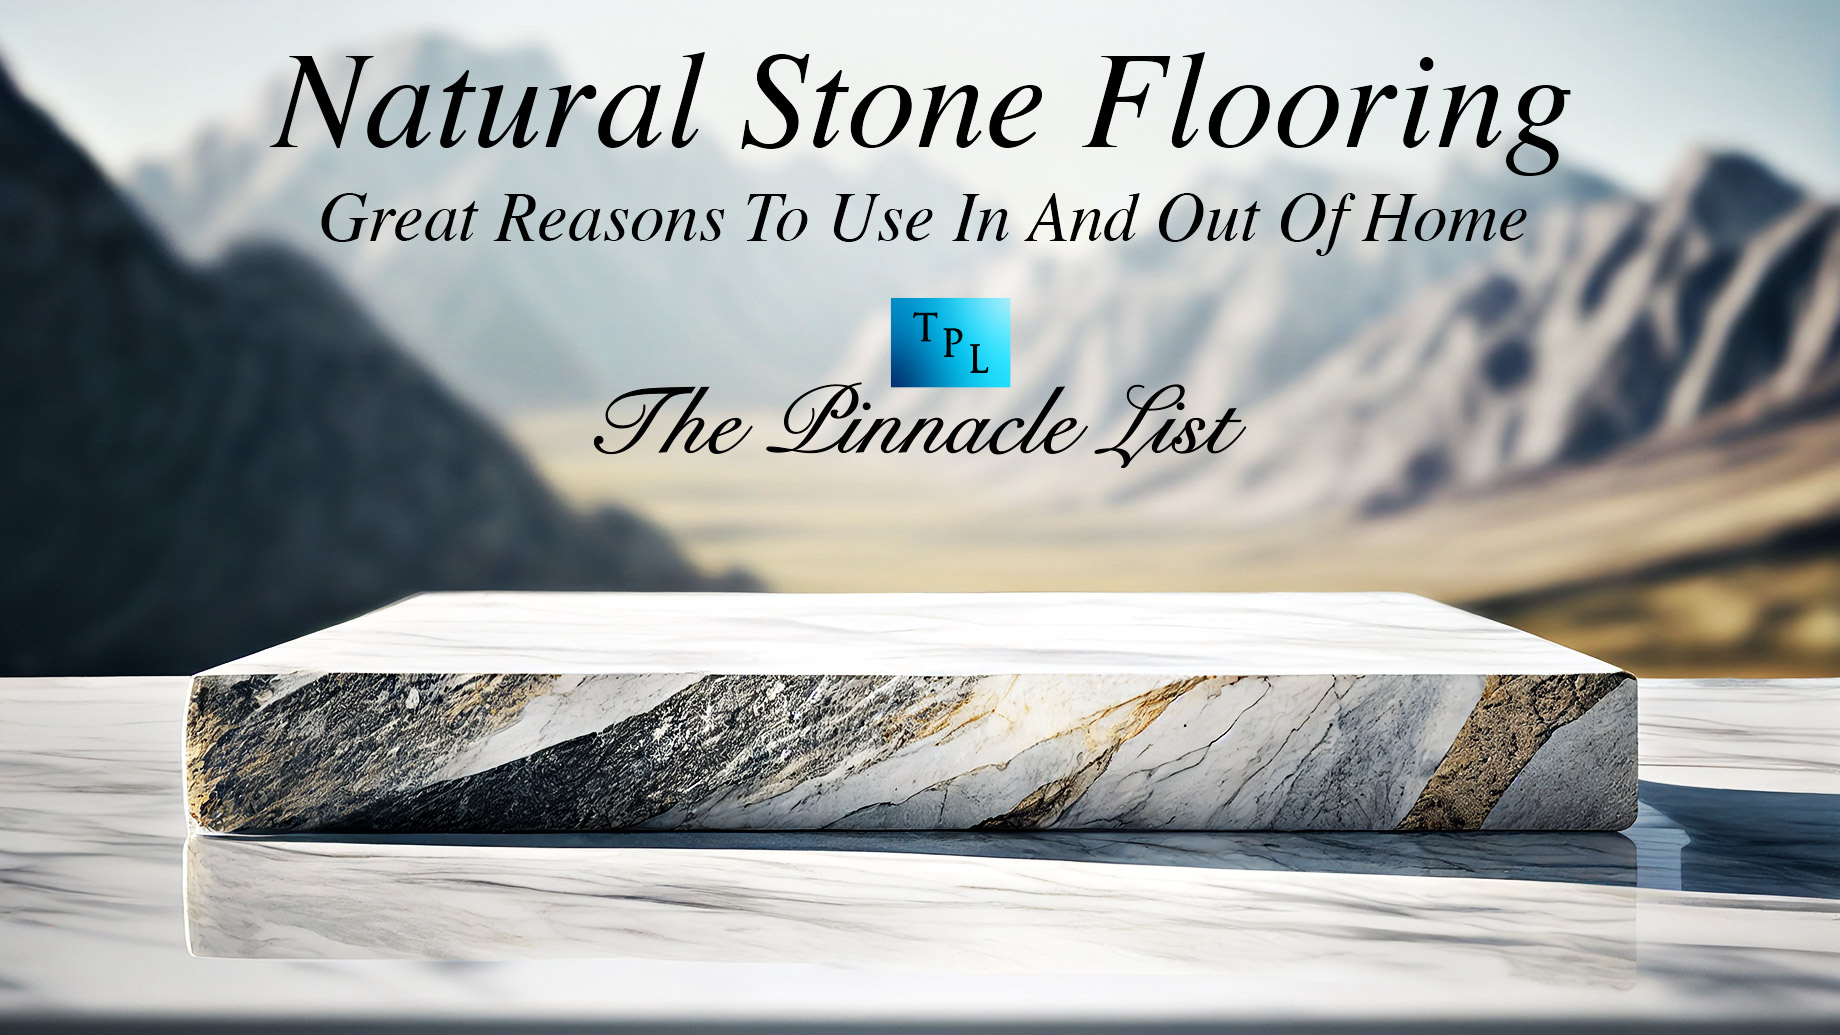 Natural Stone Flooring: Great Reasons To Use In And Out Of Home